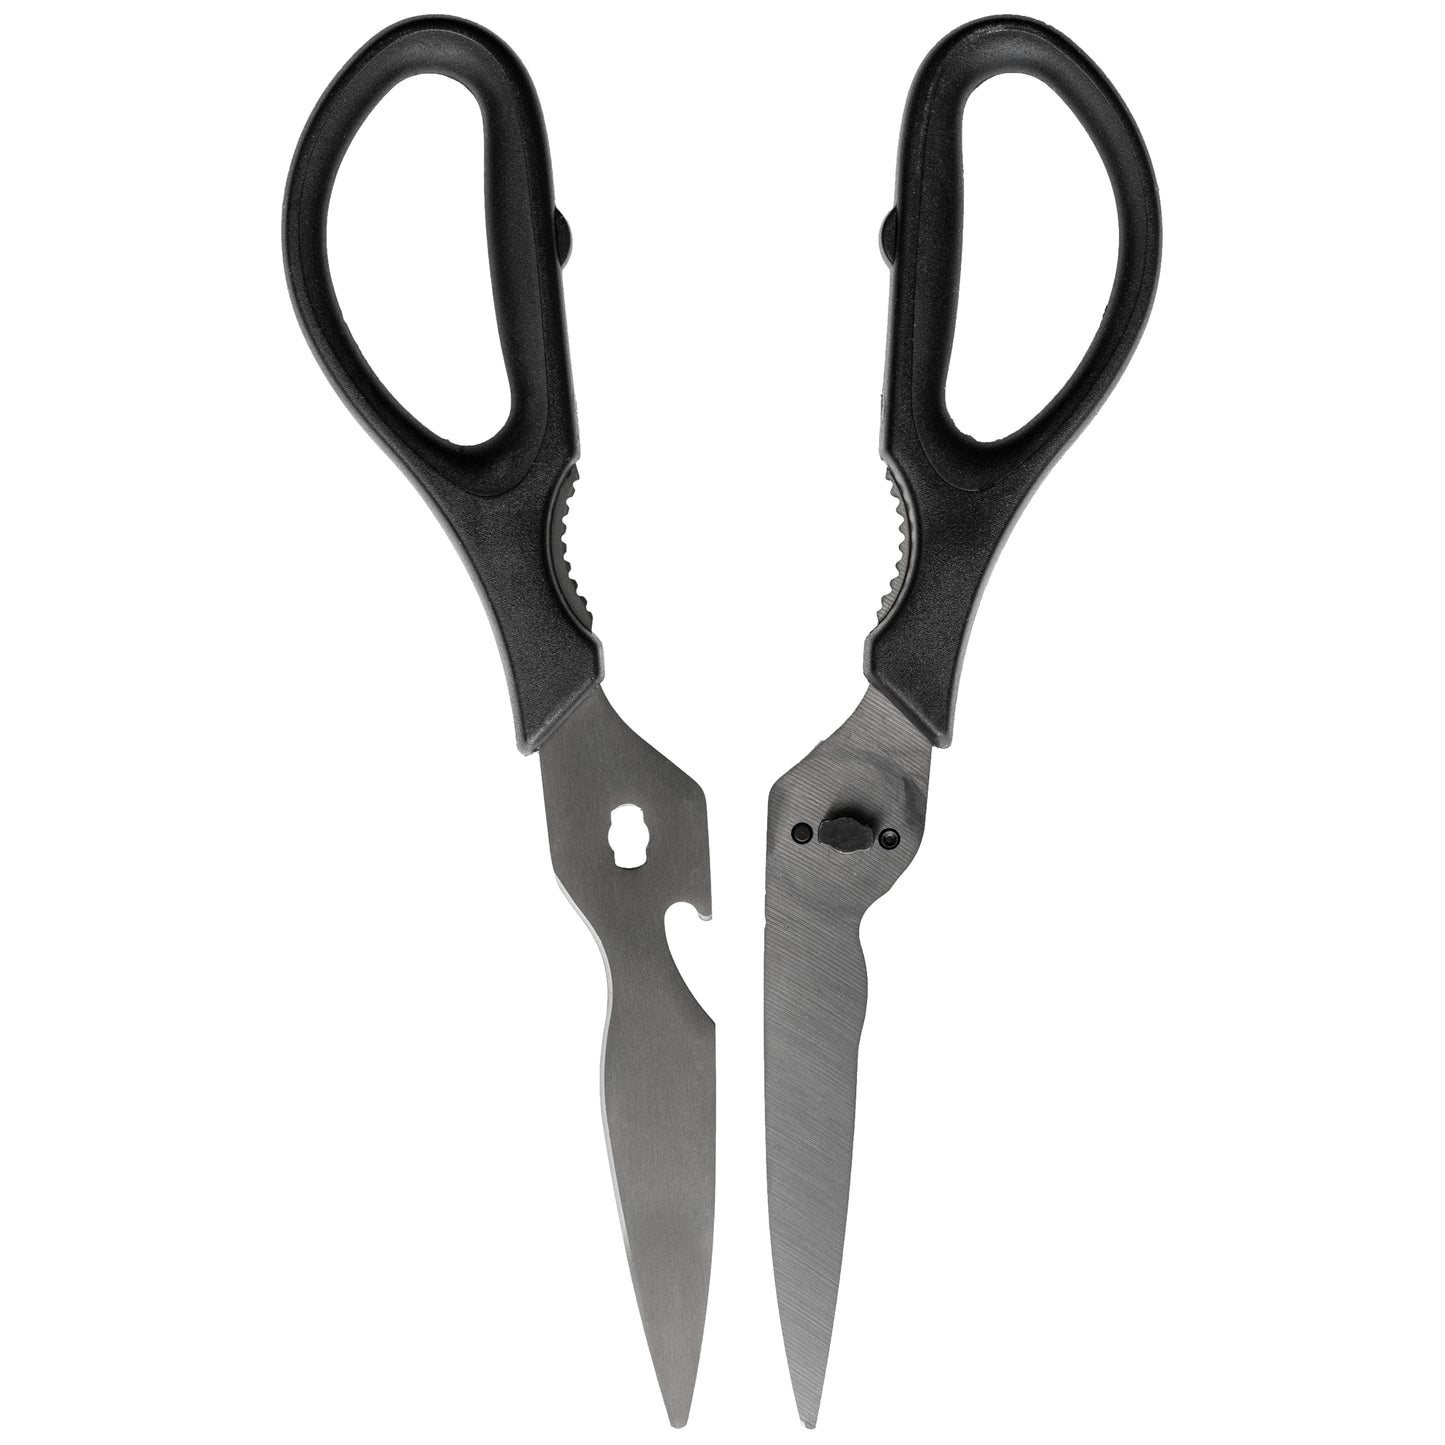 Traeger accessories - BBQ Shears - Easy to clean